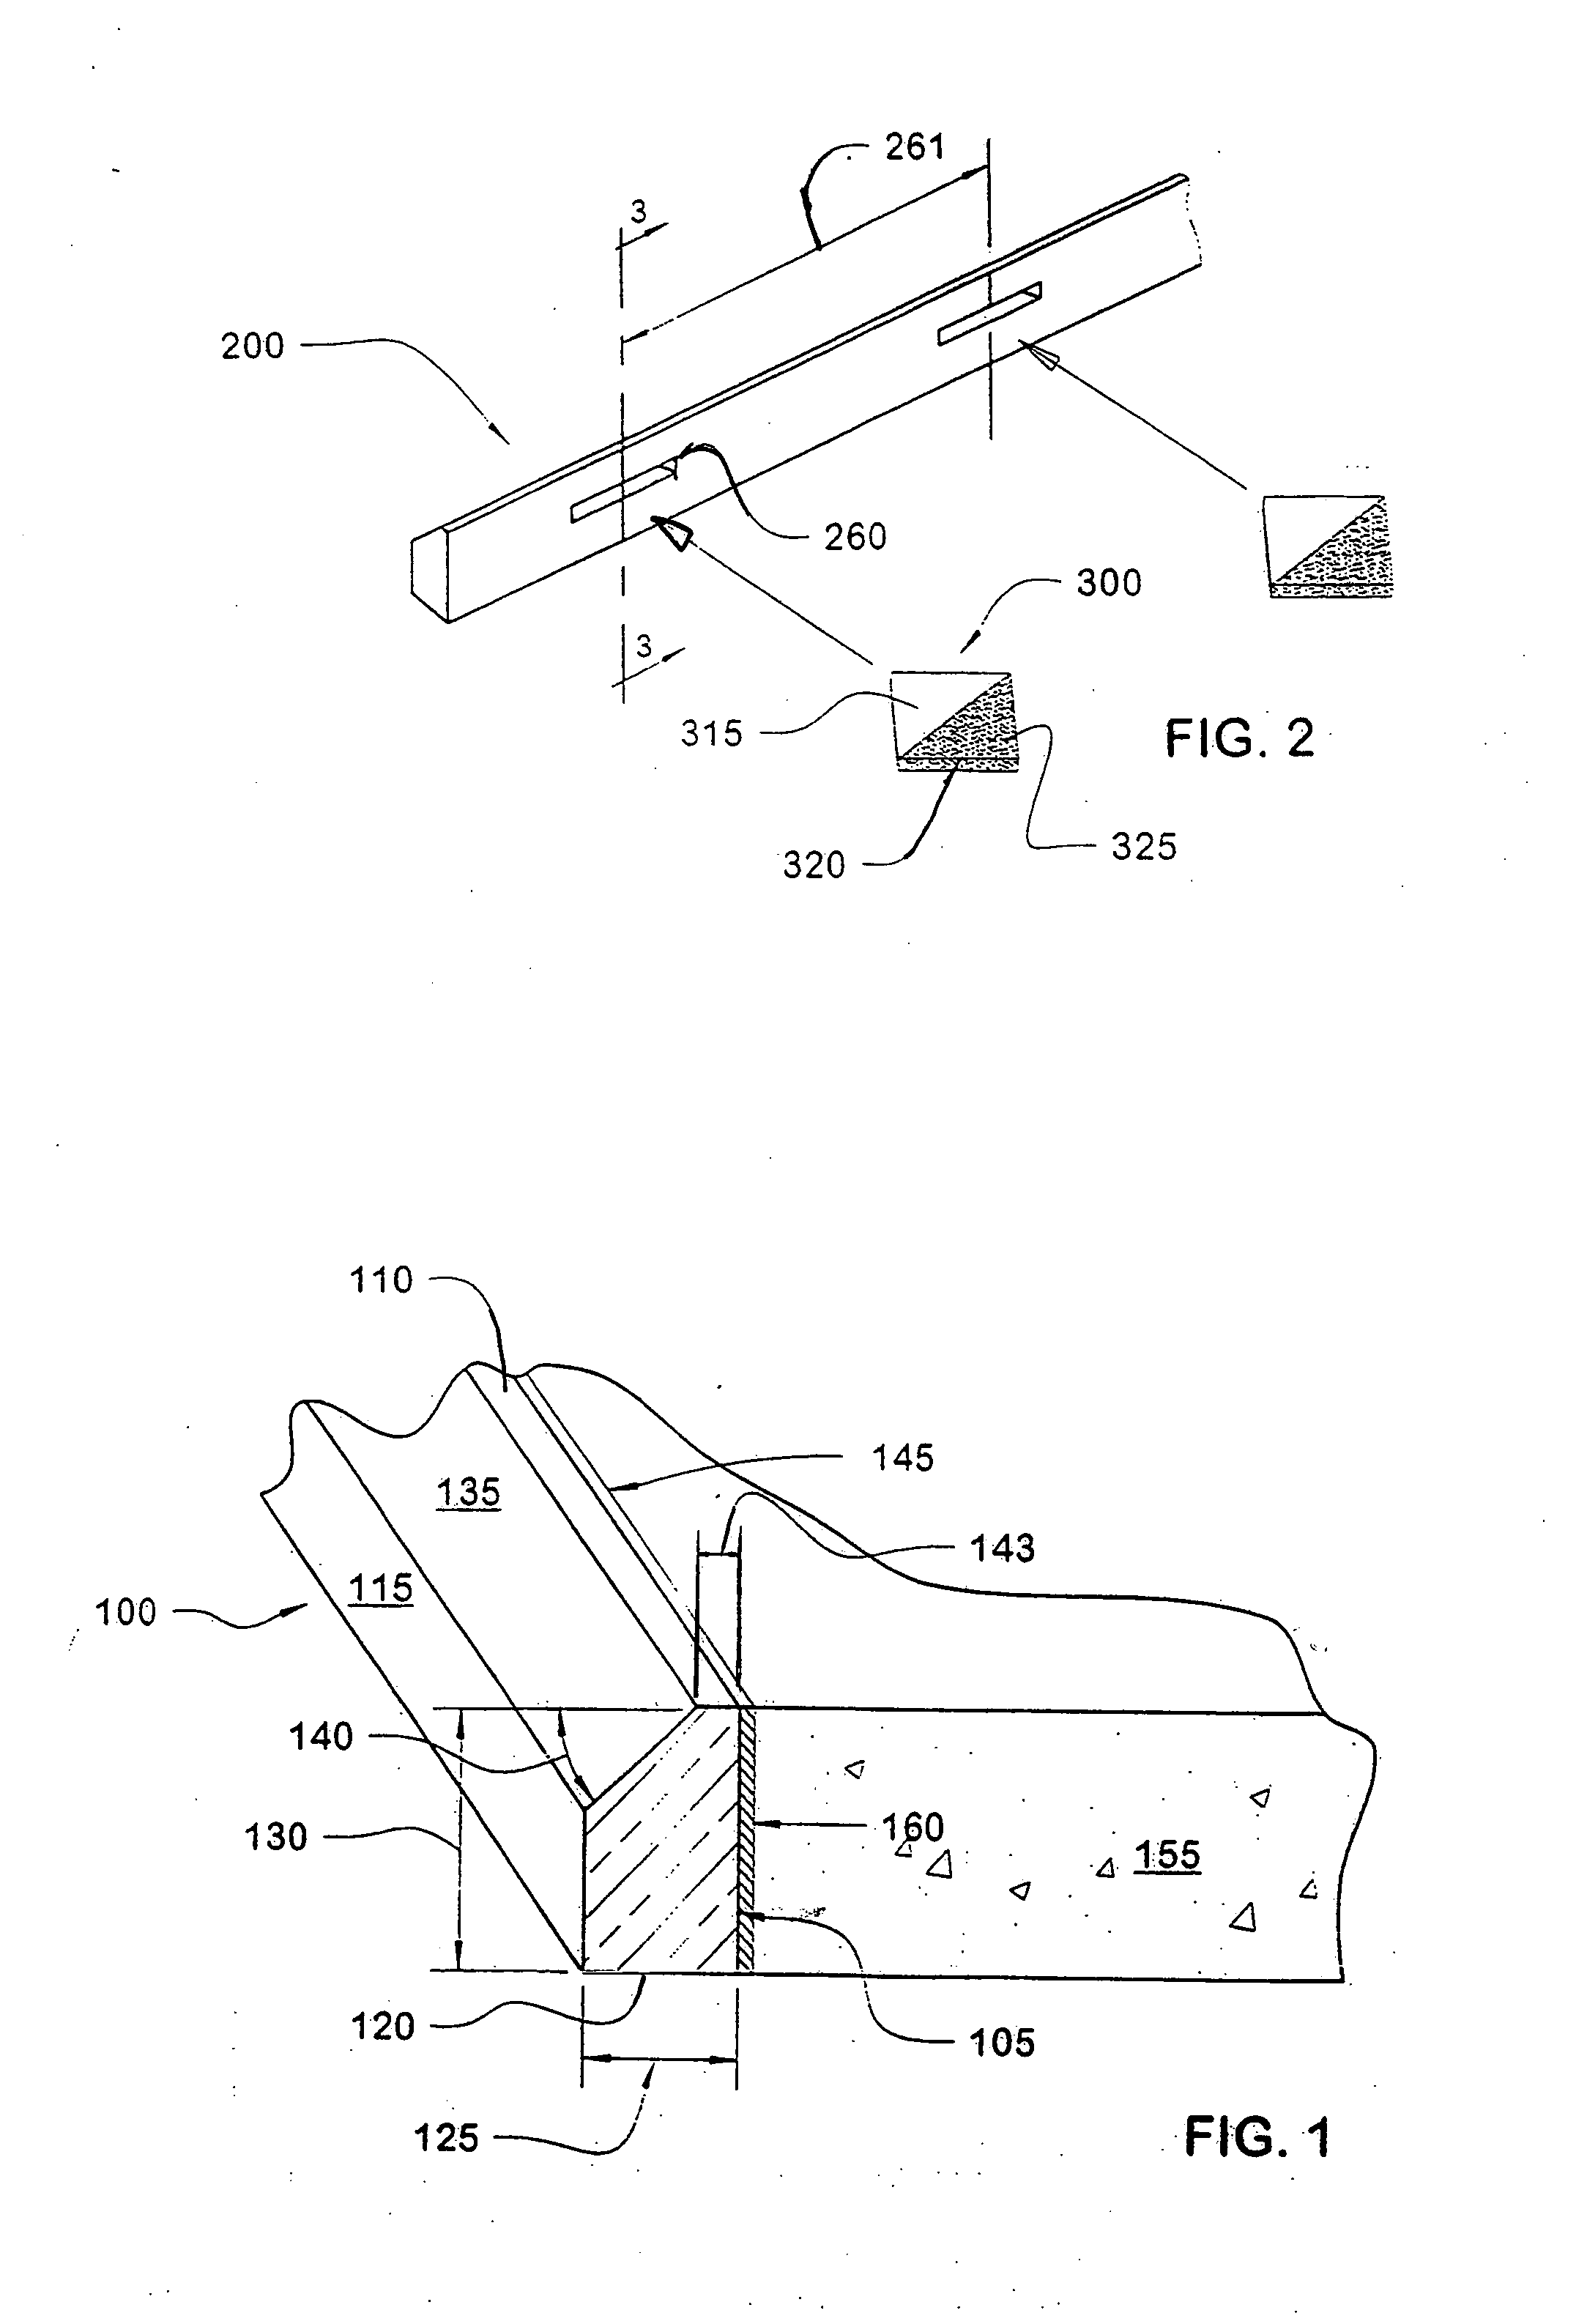 Method of forming concrete and an apparatus for transferring loads between concrete slabs